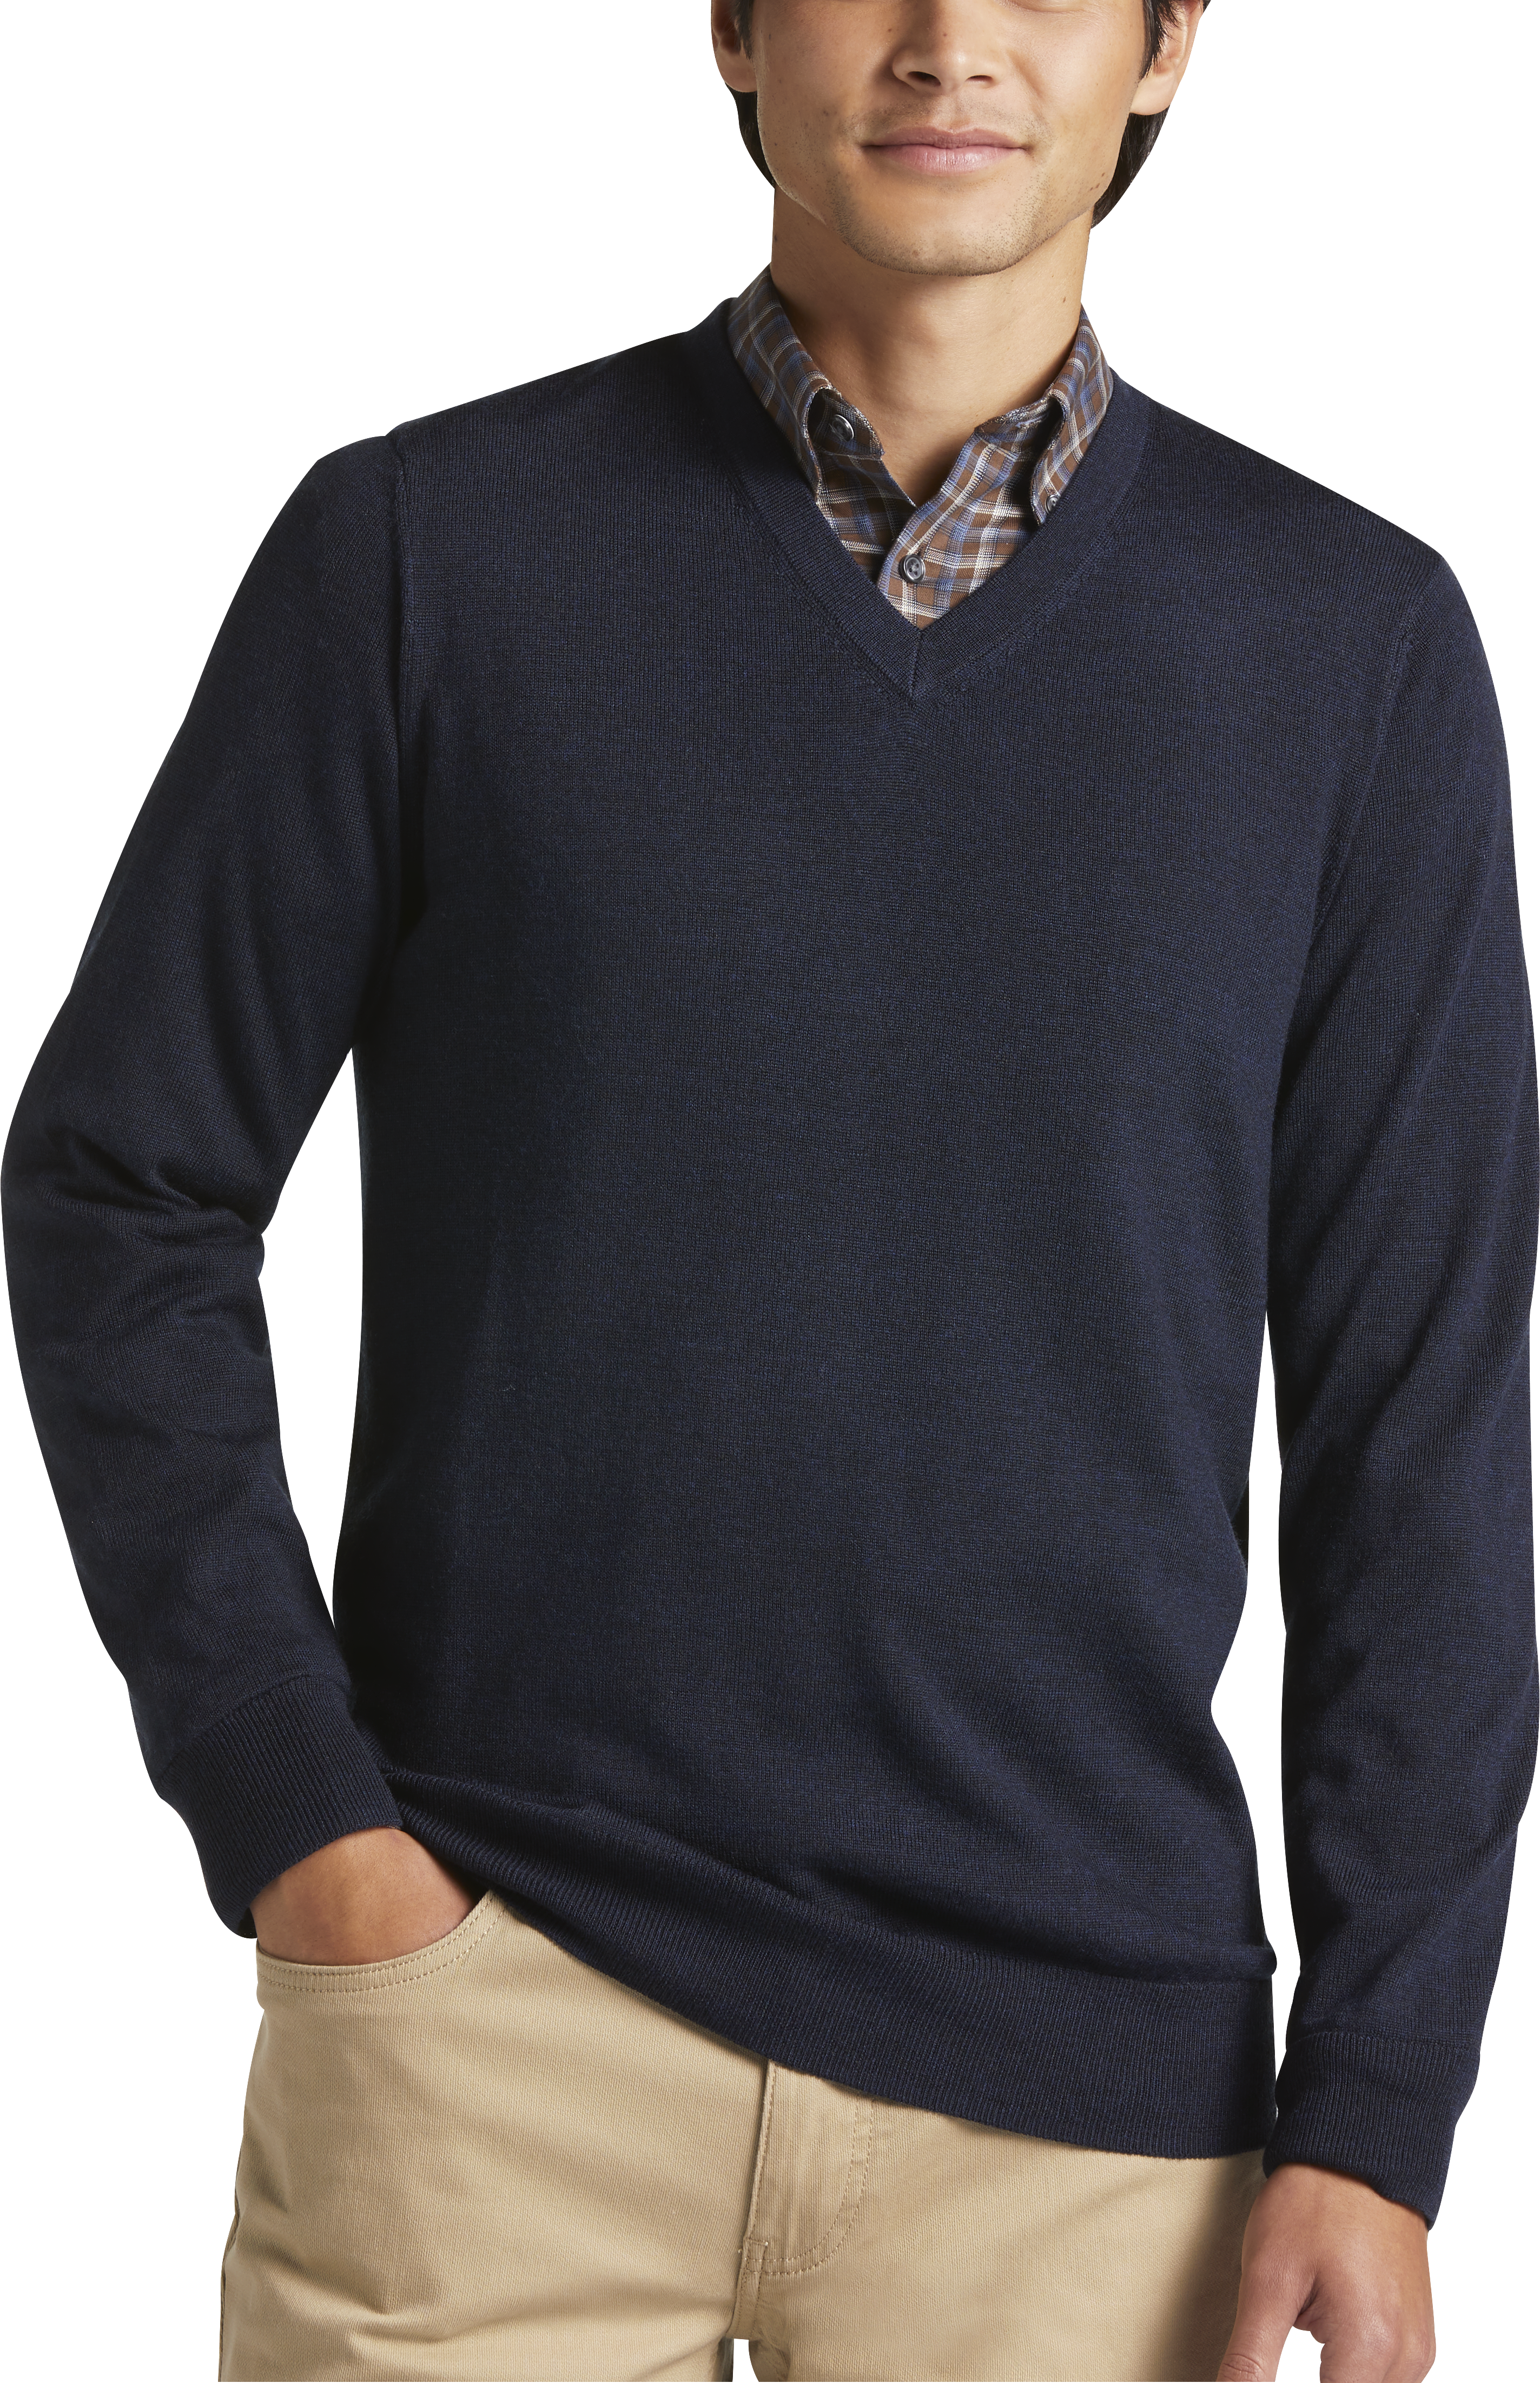 Joseph Abboud Reserve Collection Modern Fit V-Neck Merino Wool Sweater ...